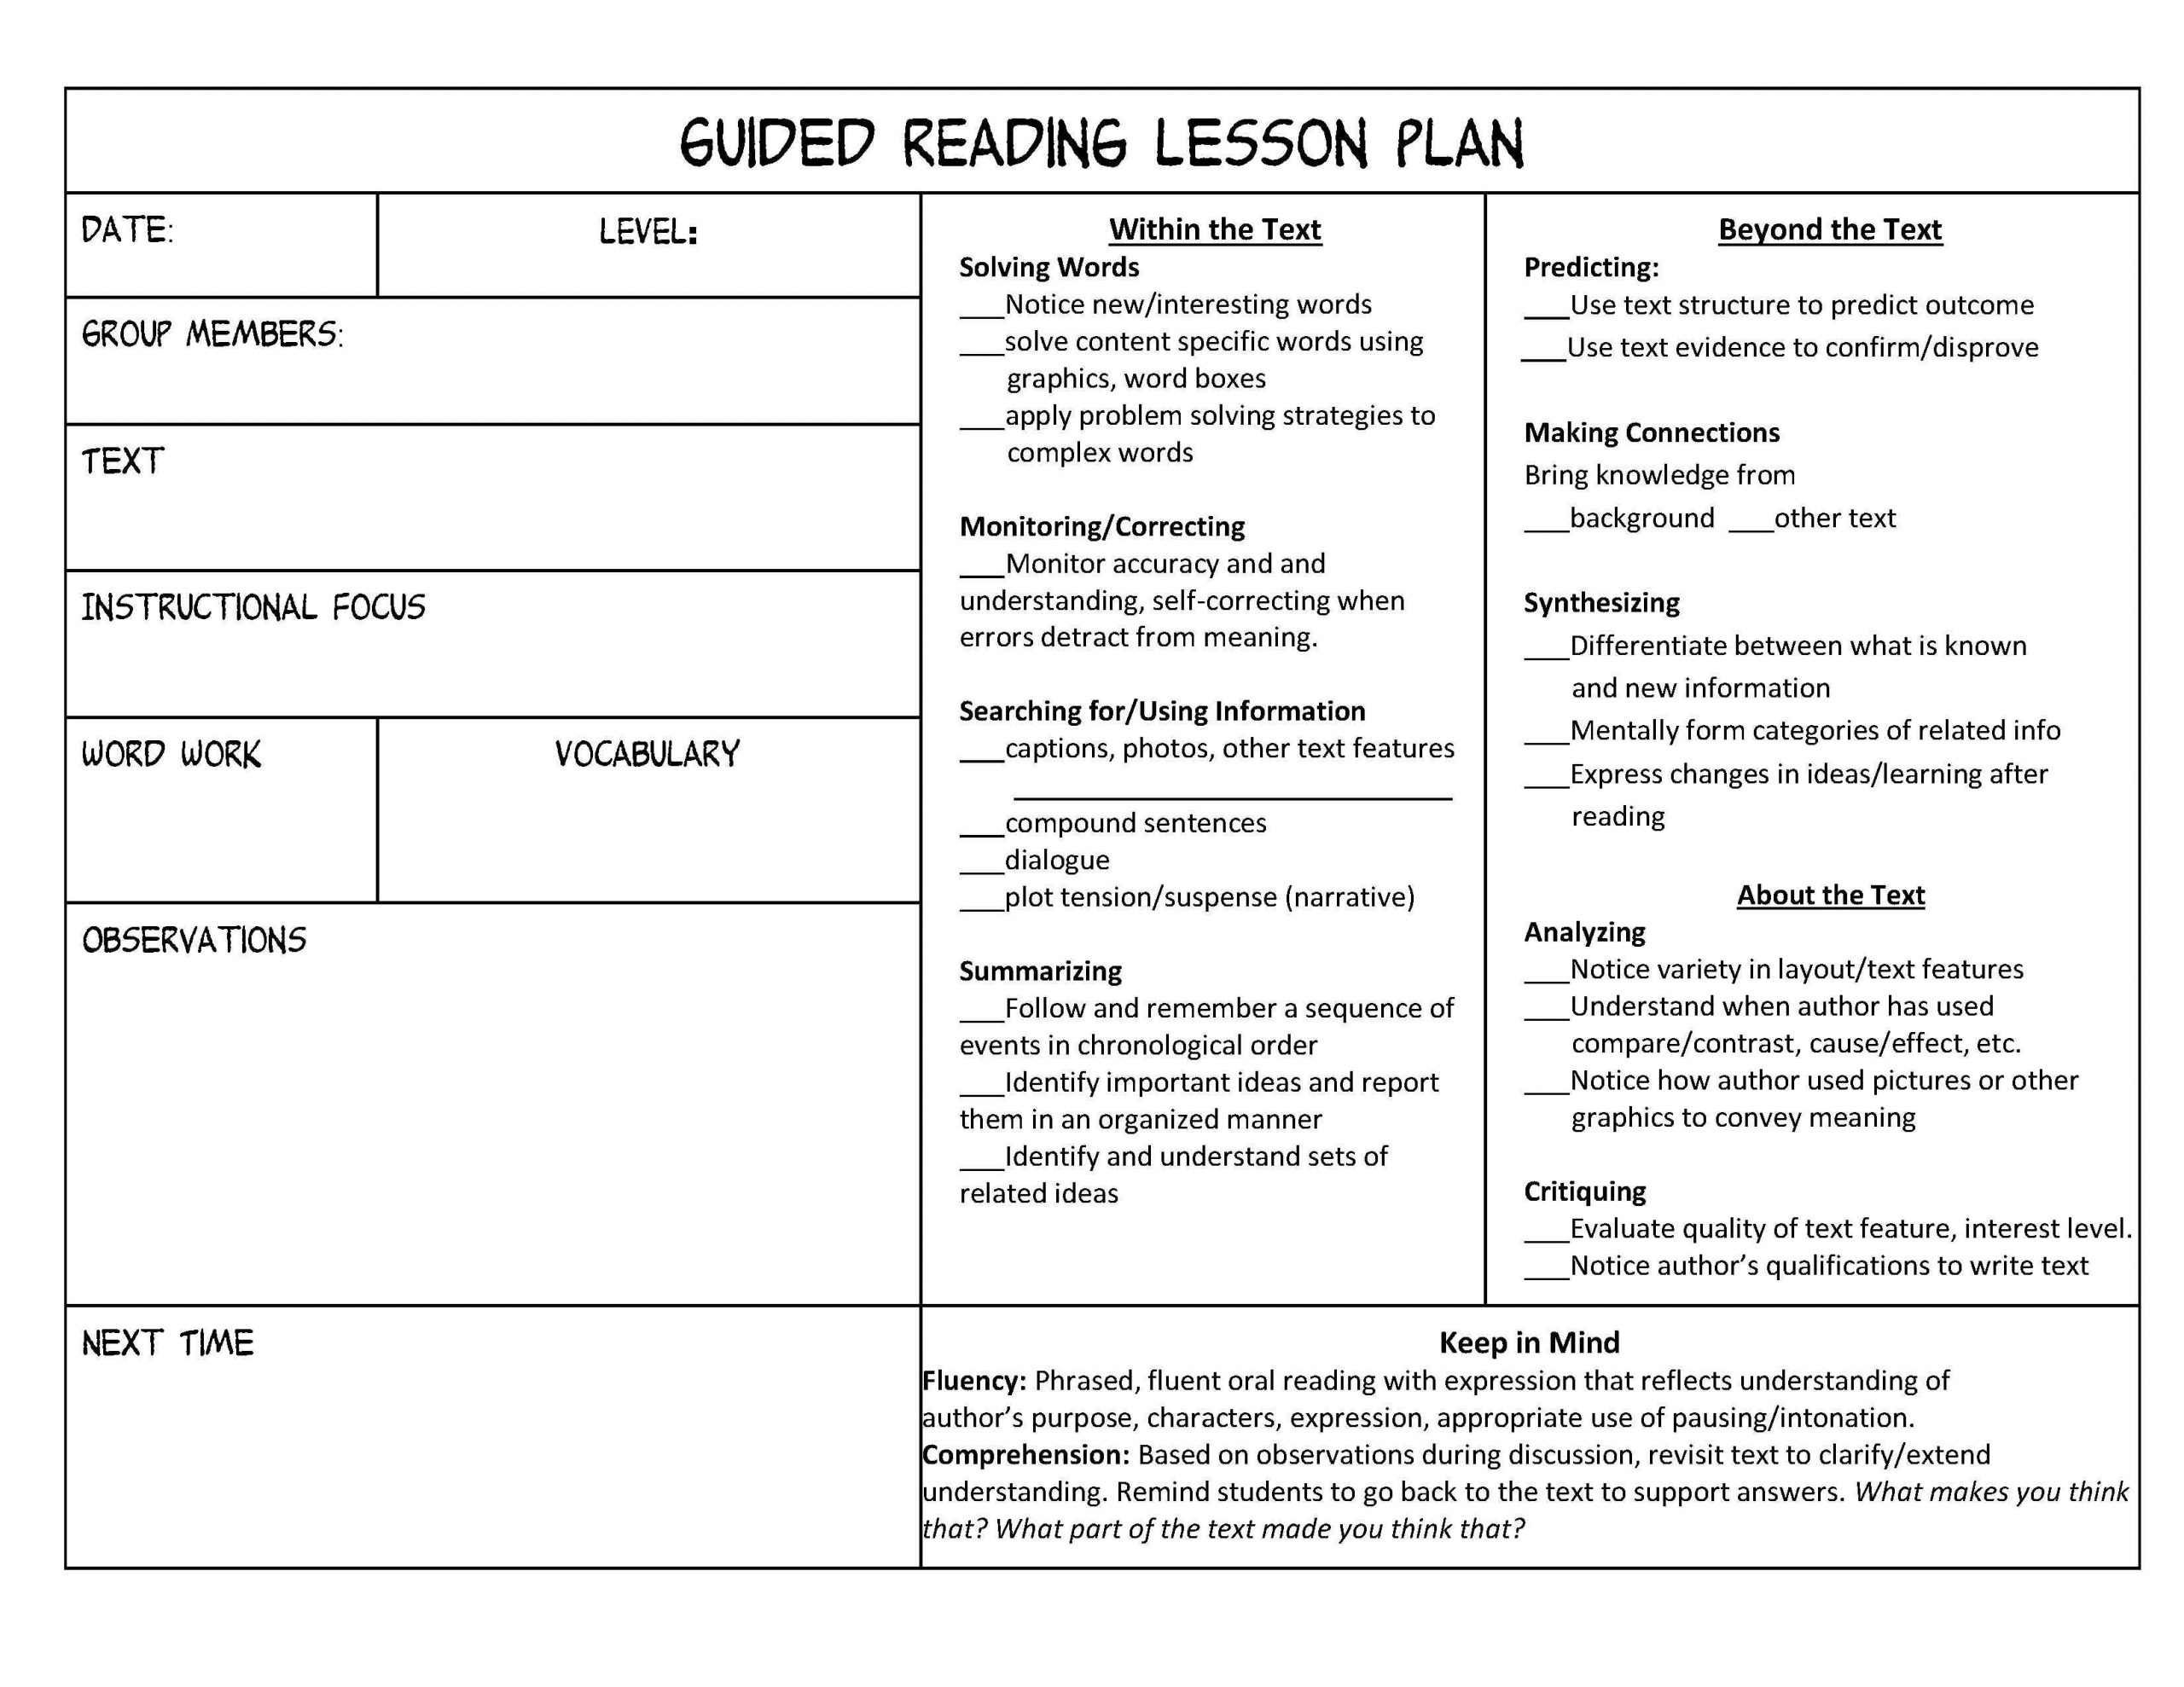 Scholastic Free Lesson Plans Guided Reading organization Made Easy